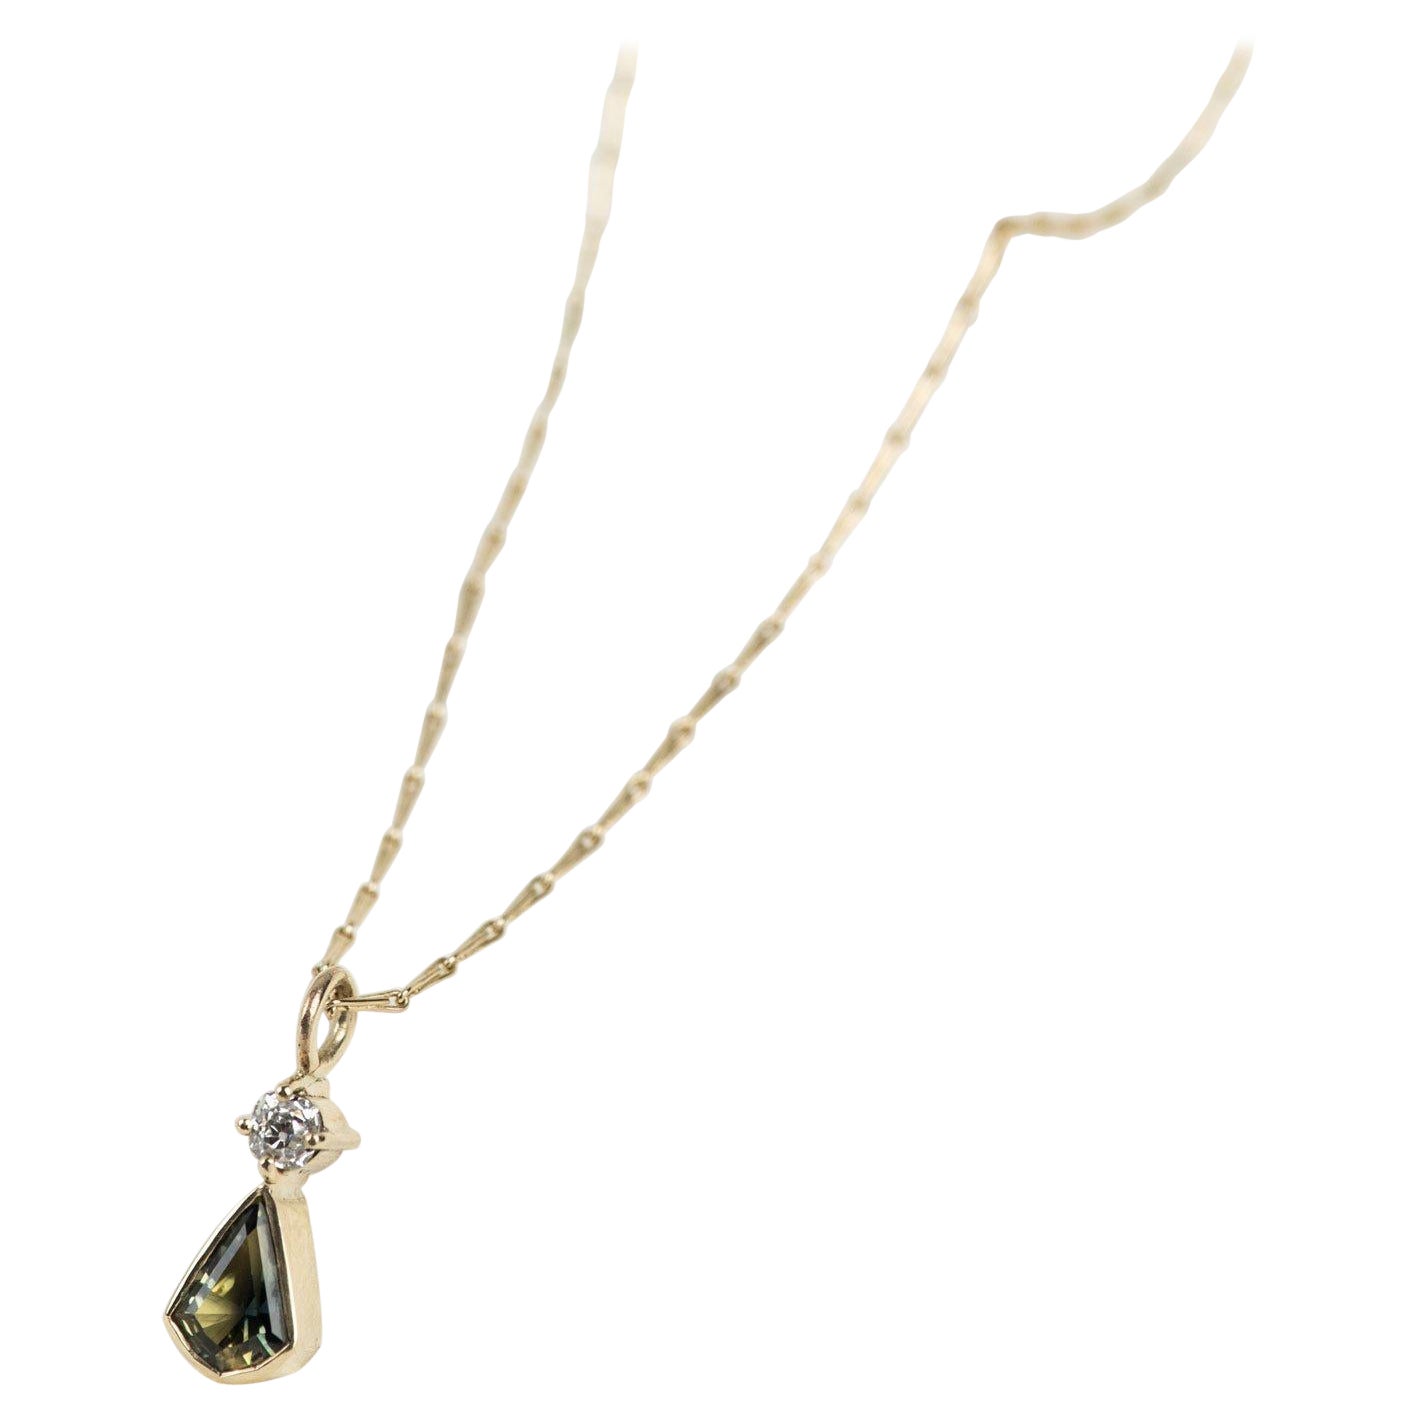 This beautiful 18inch yellow gold hayseed chain holds a glistening unheated Australian parti-sapphire in a rub-over setting. Above the main stone, you can find shimmering reclaimed diamond delicately set in a claw setting. The perfect ethical